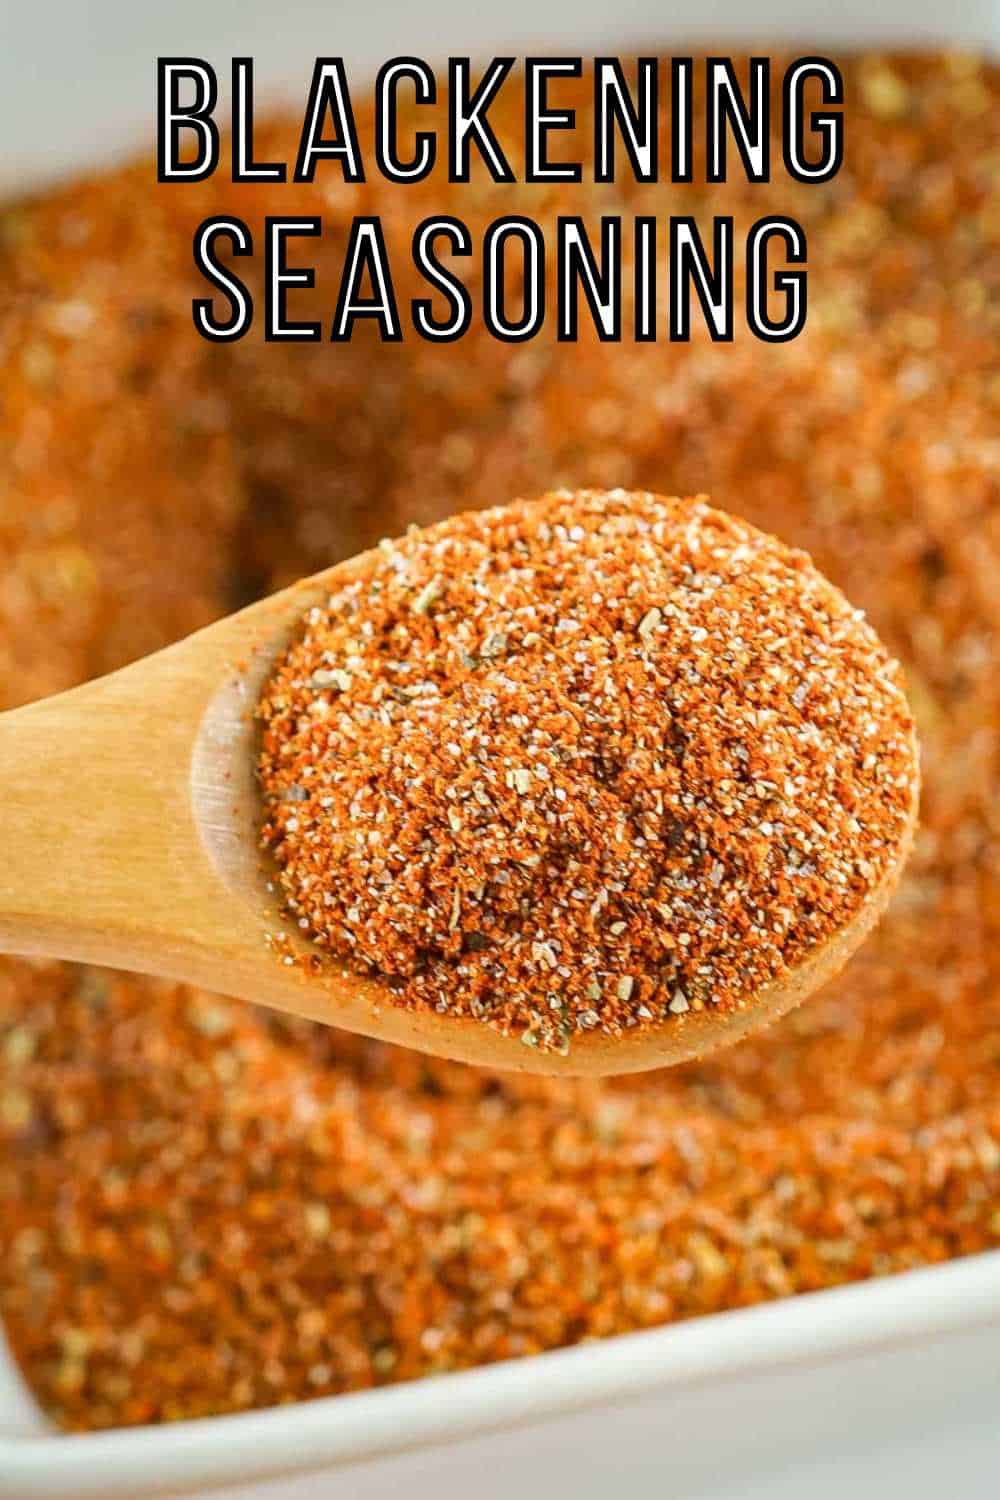 Overhead close up shot of a wooden spoon holding a scoop of seasoning over a white bowl full of blackened seasoning on a white surface.